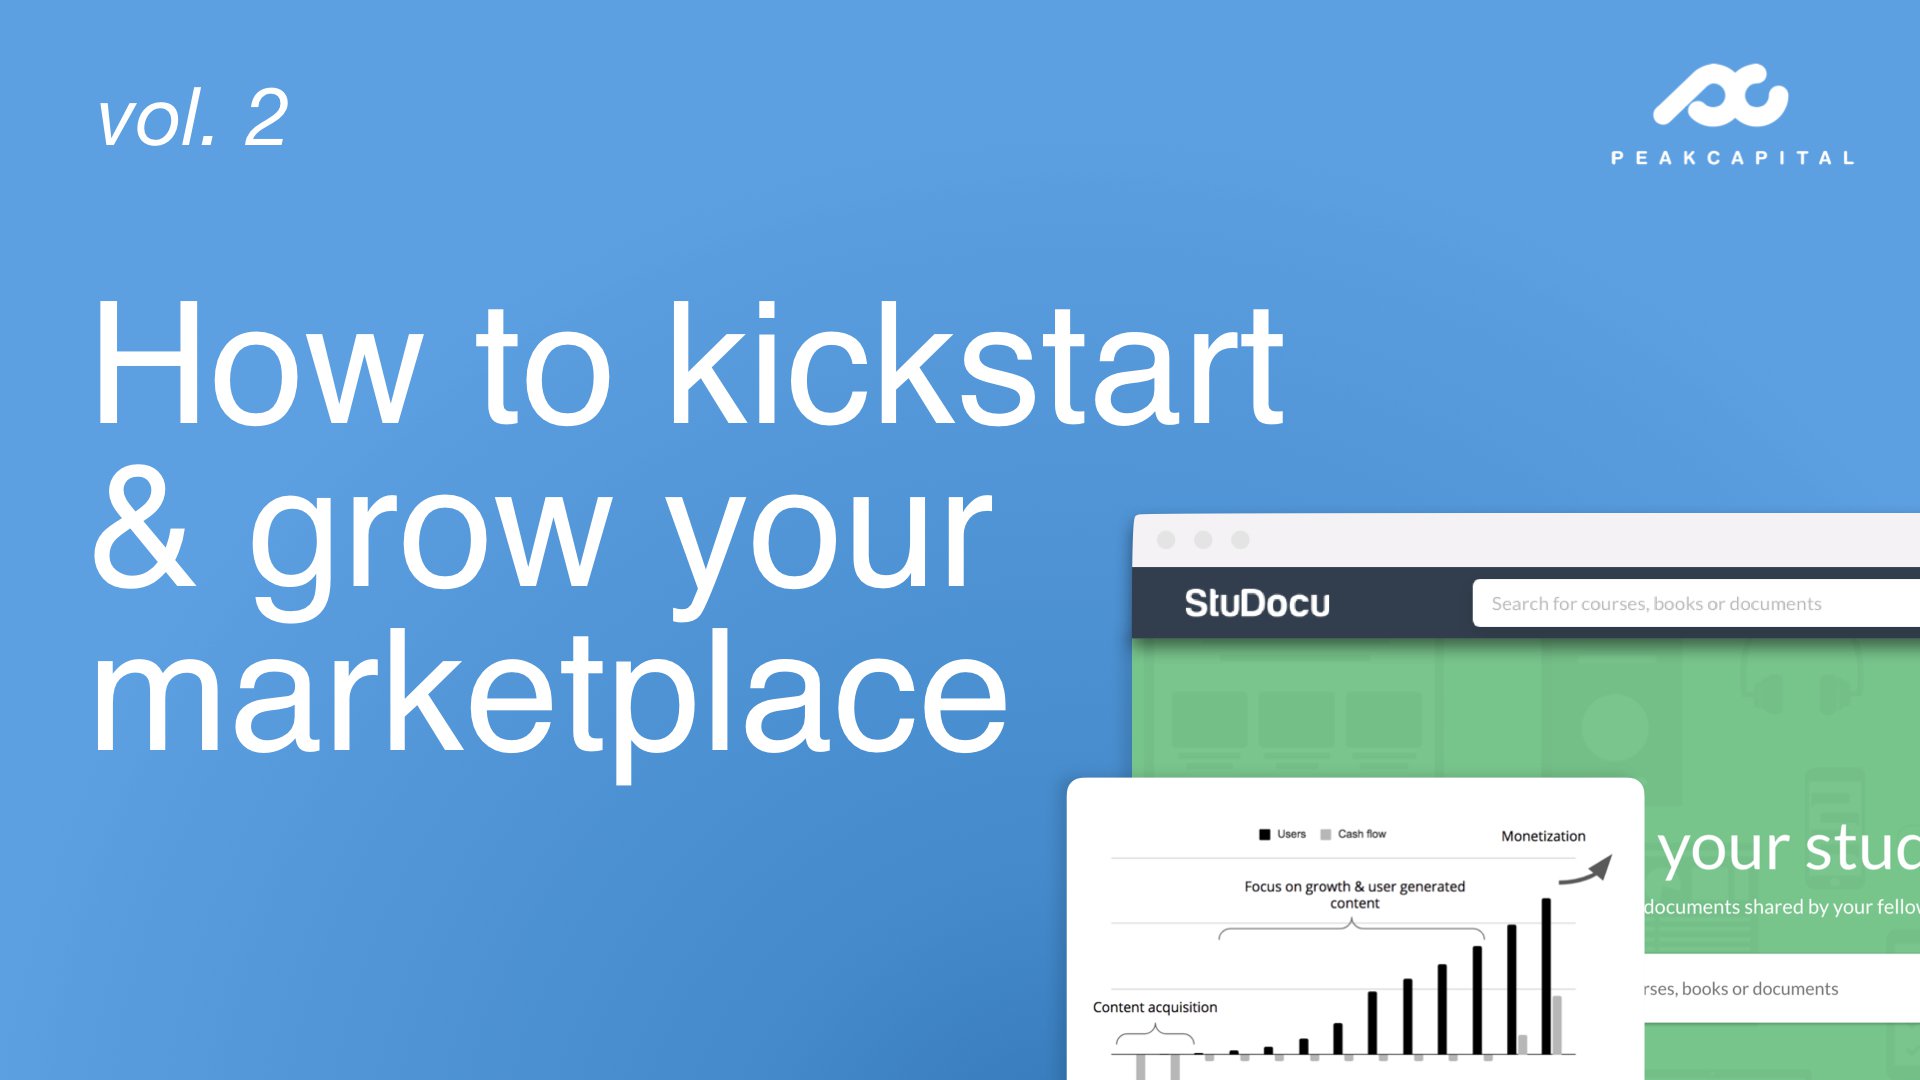 5 strategies to kickstart & grow your marketplace - from founders for founders.